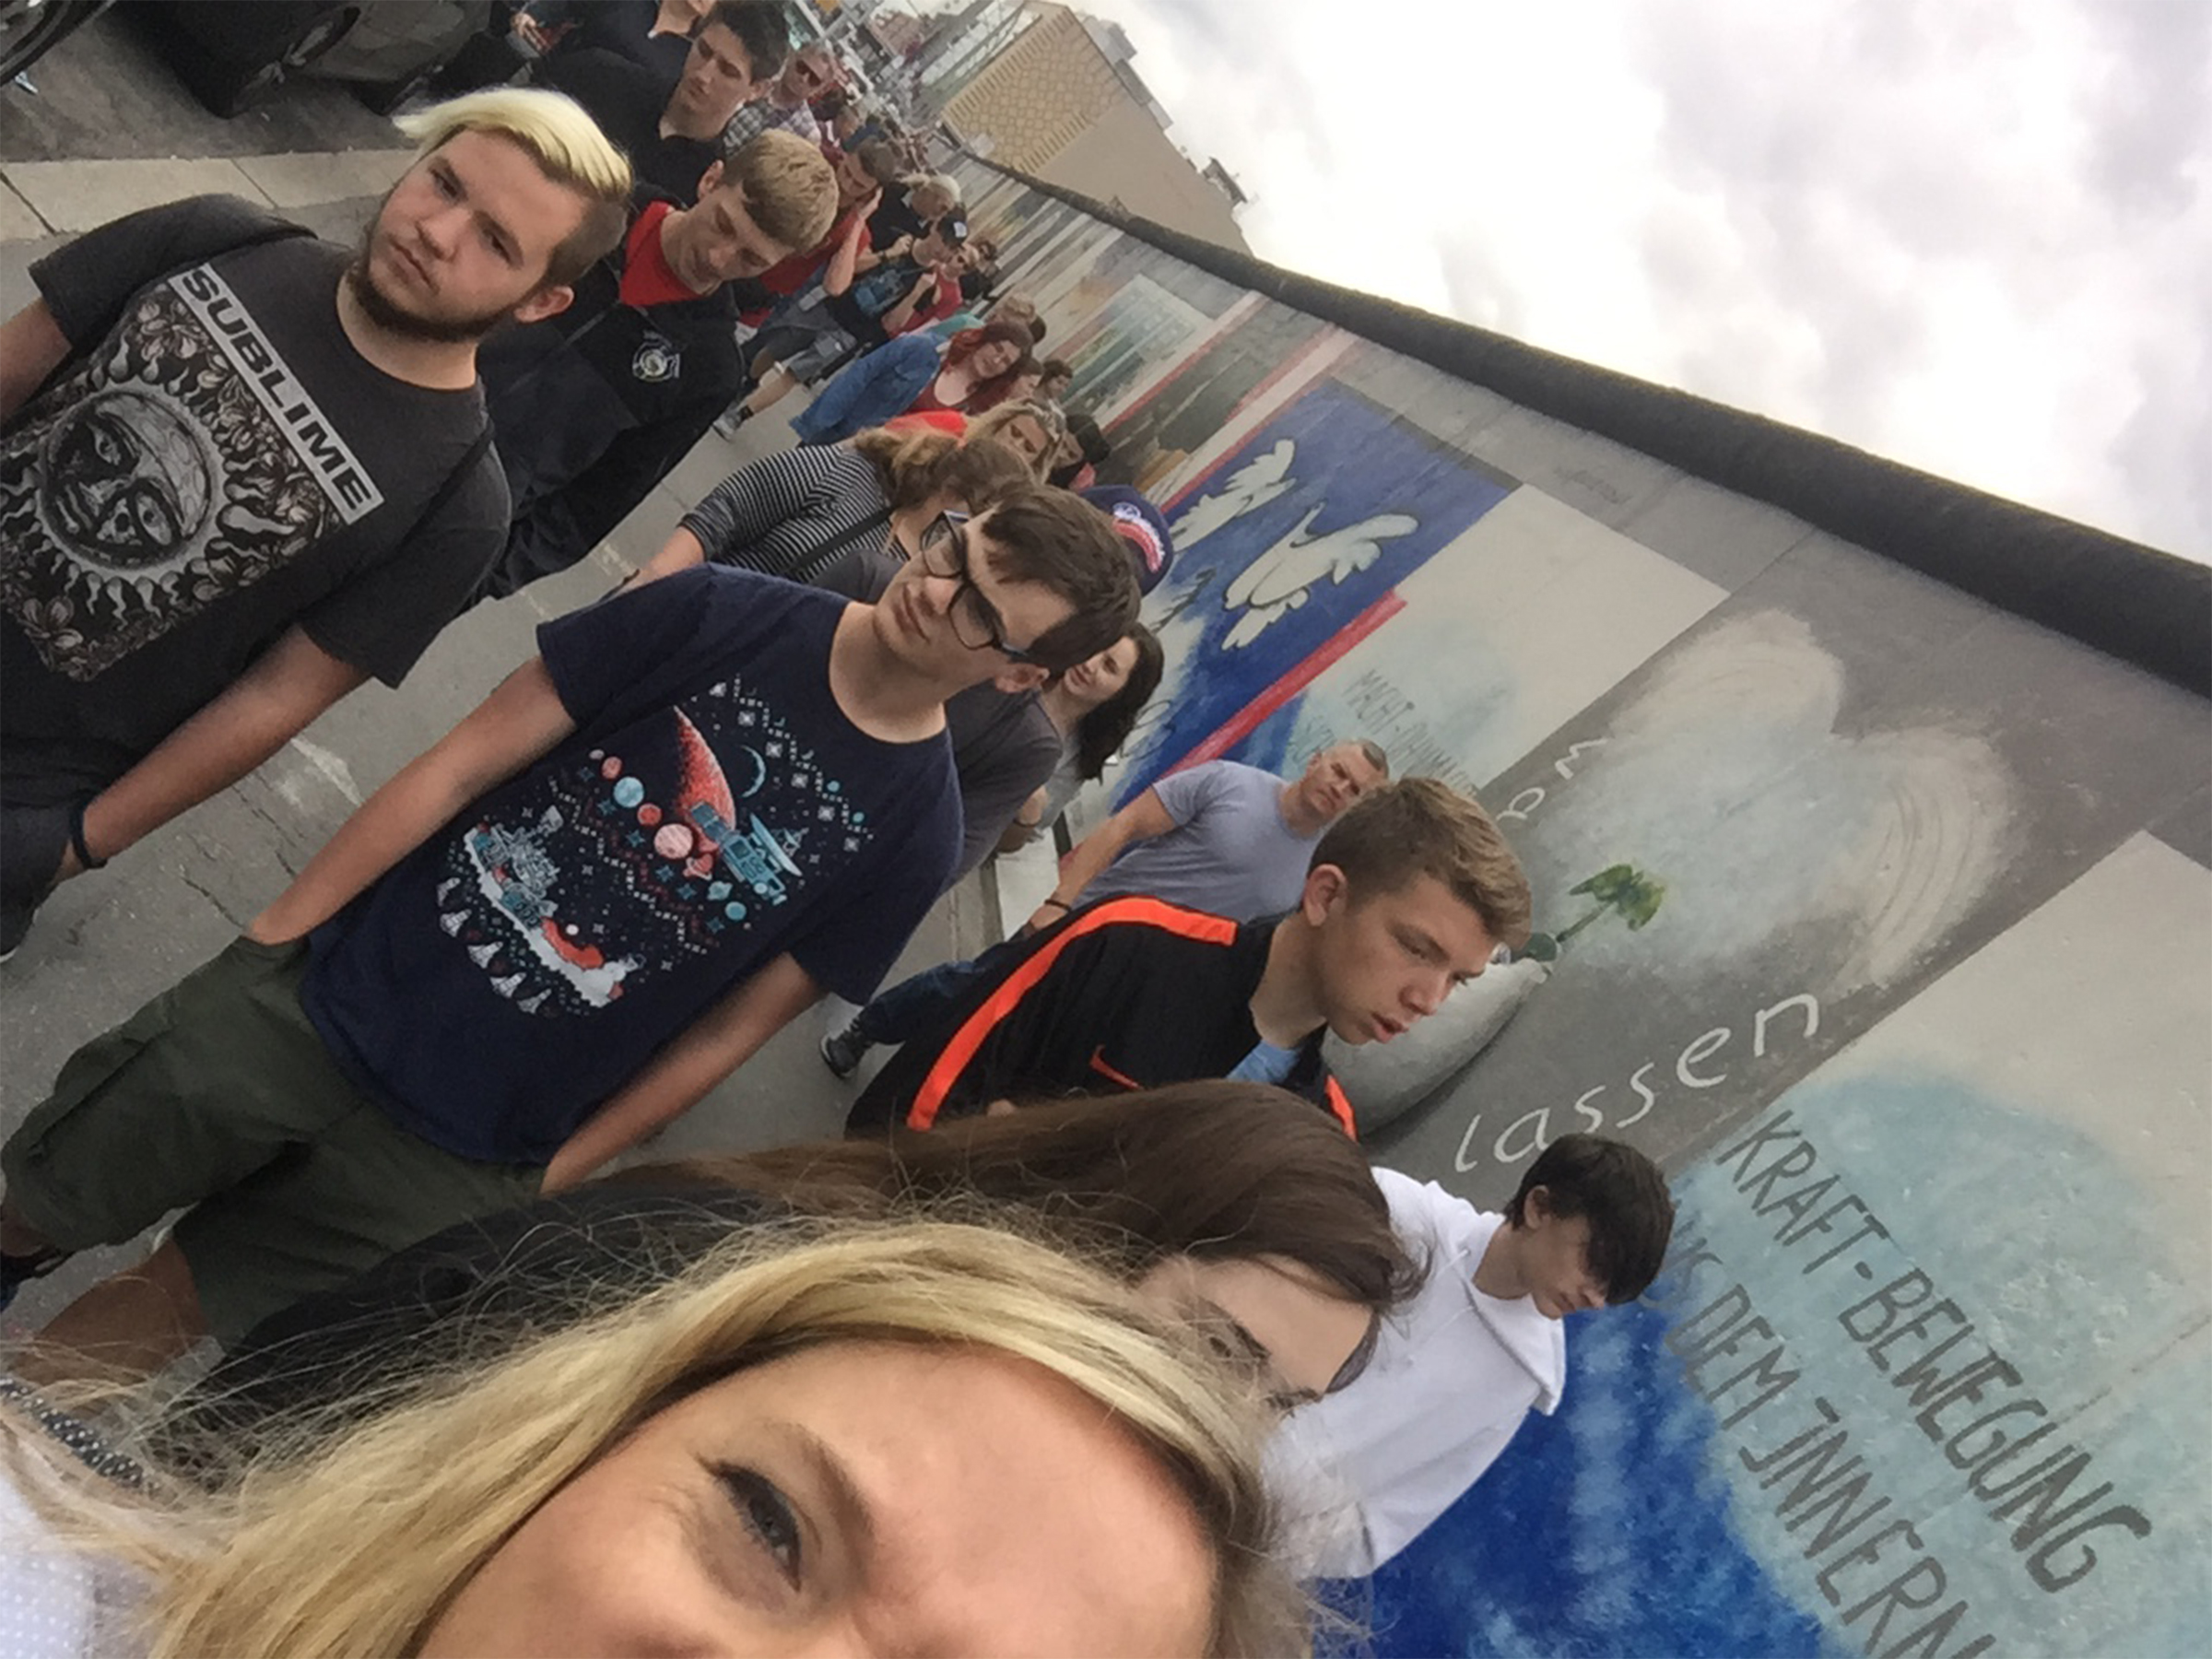 Heather shows her students the Berlin Wall as a prelude to their student reflection activities.